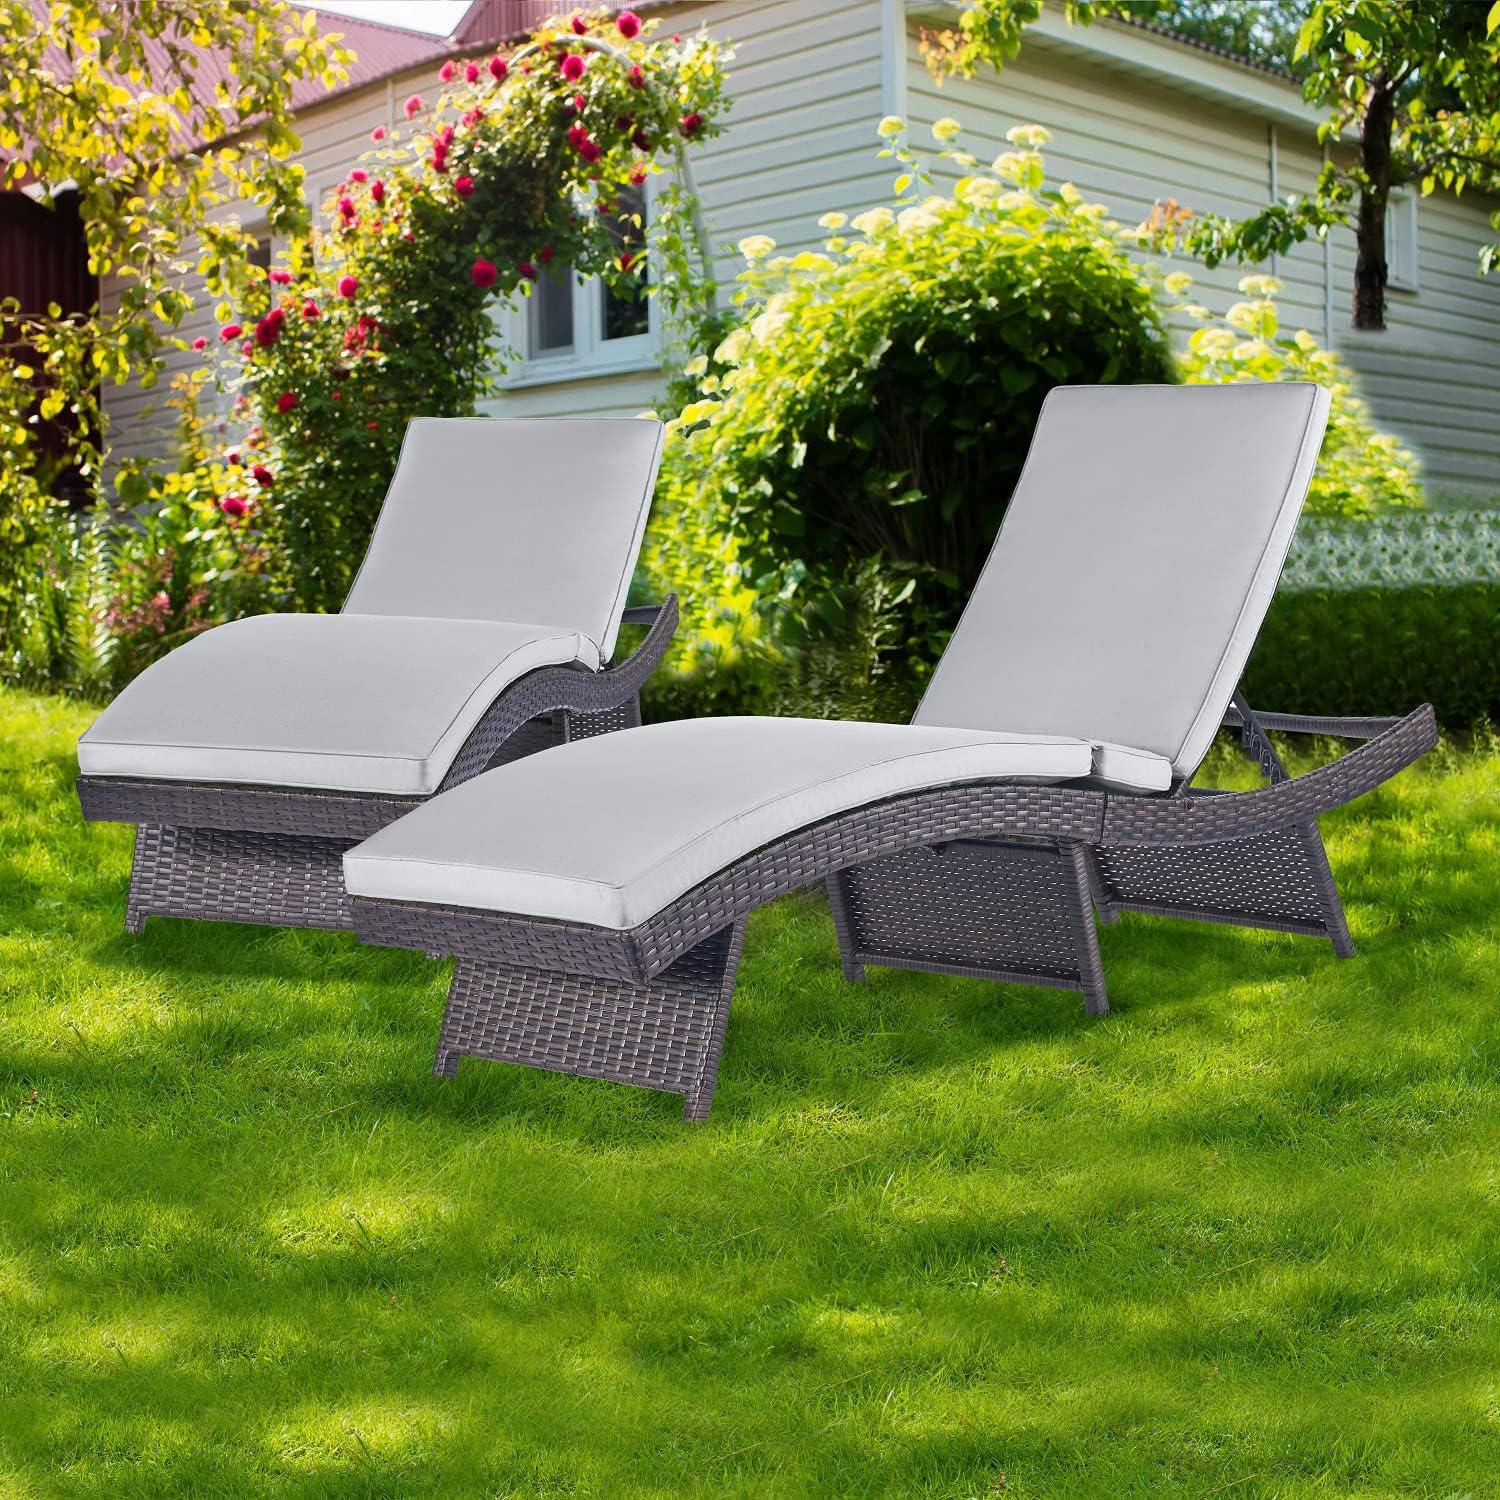 Outdoor Chaise Lounge Chair Foldable Patio Wicker Pool Lounge Chairs for Outside Set of 2 Assembled Rattan Reclining Sun Lounger Chair Cushion Grey S Type Adjustable Backrest, No Assembly Required